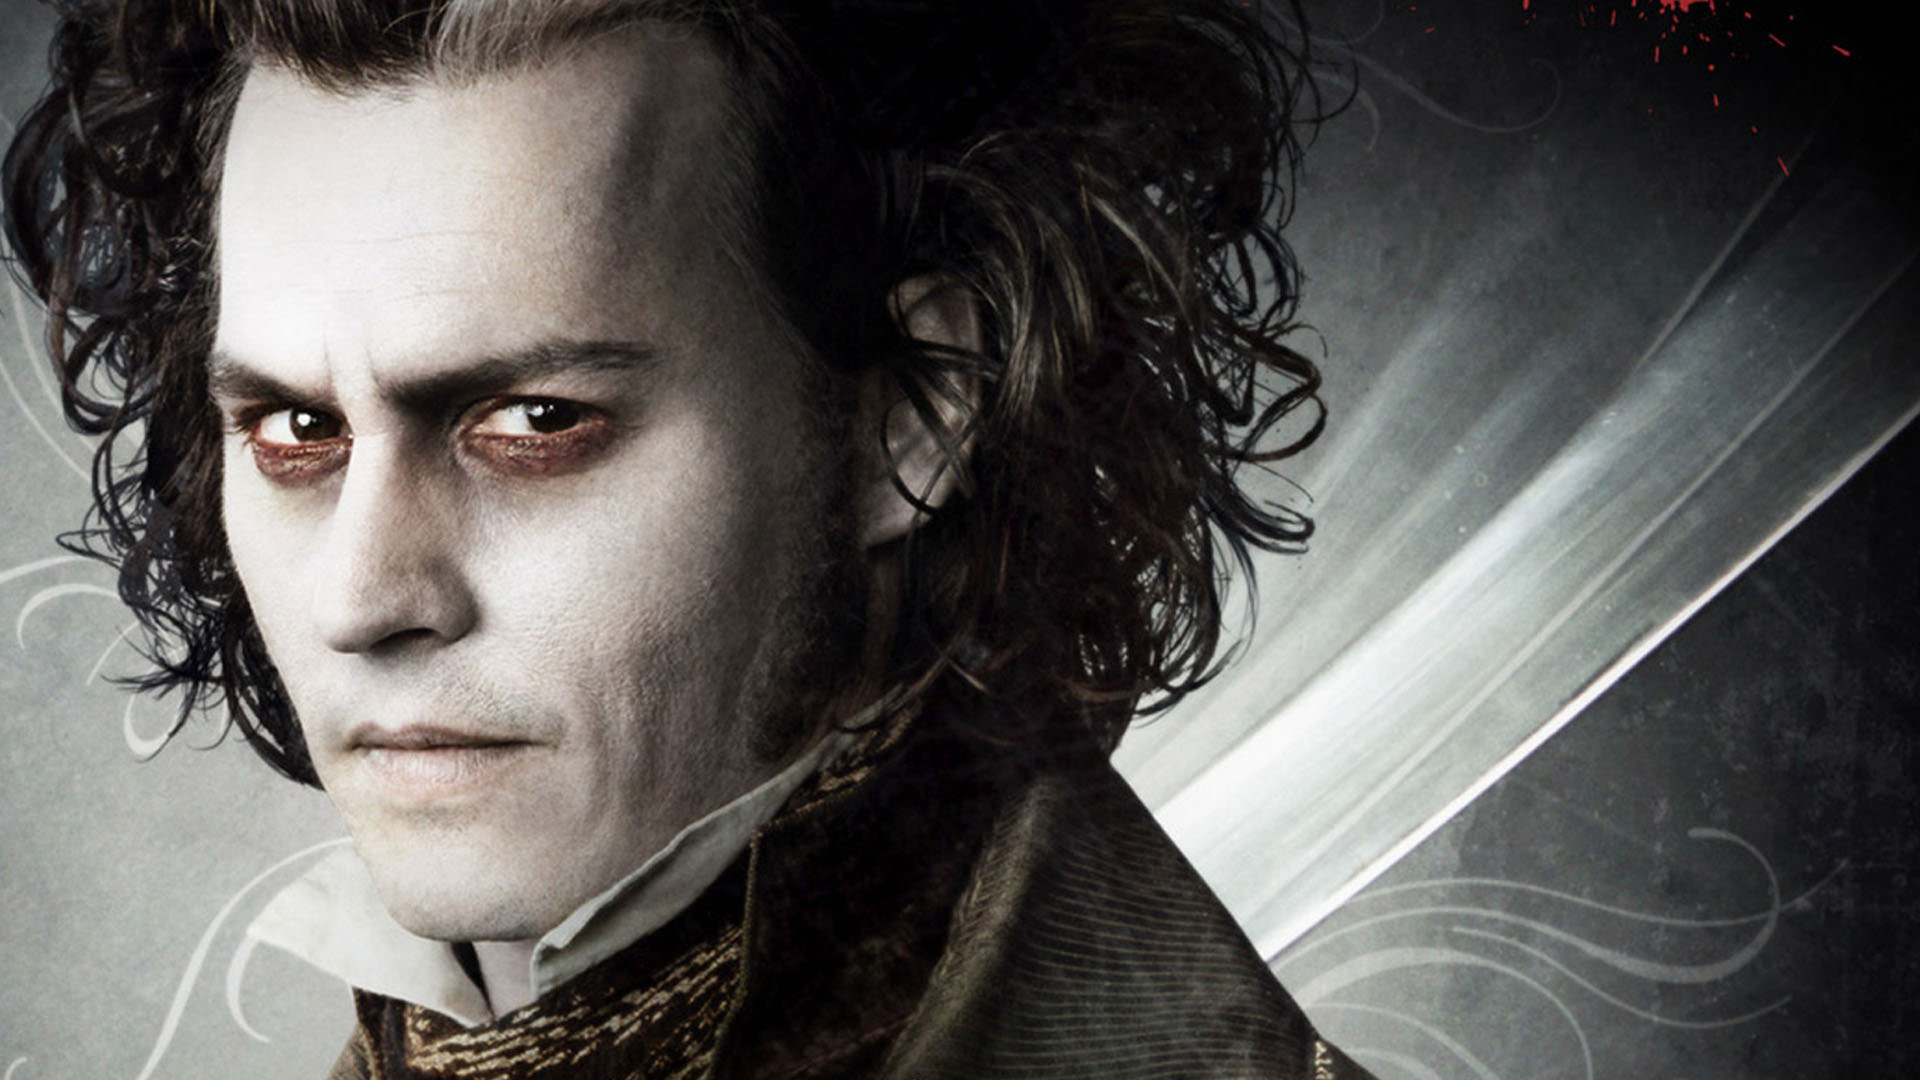 Sweeney Todd wallpapers movie, Celebrity HQ, Sweeney Todd pictures, Amazingly fantastic, 1920x1080 Full HD Desktop